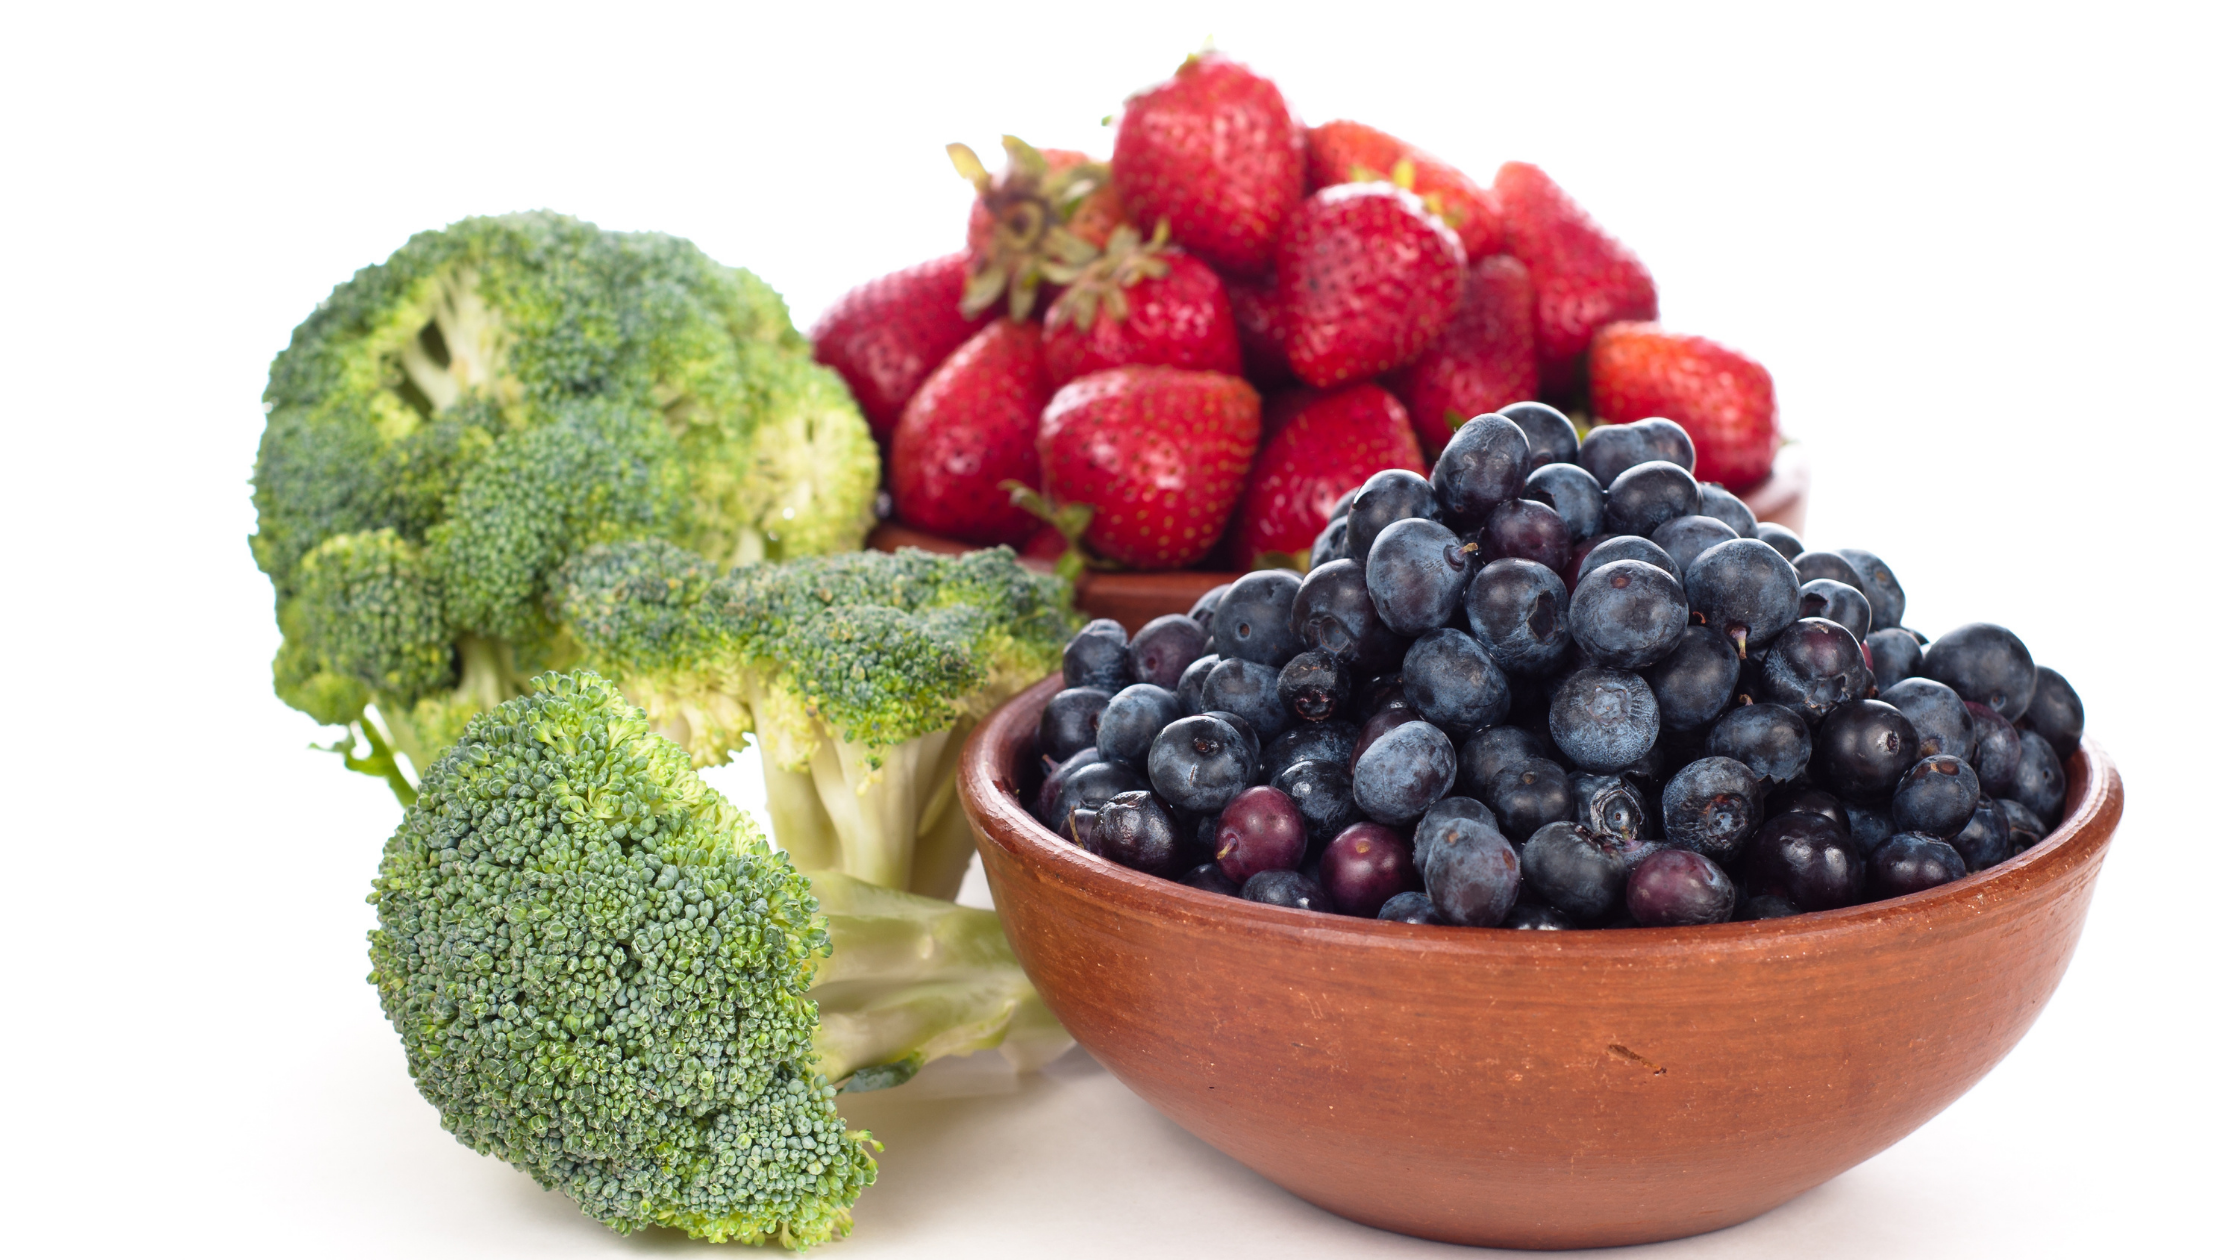 antioxidants have a positive impact on cognitive function